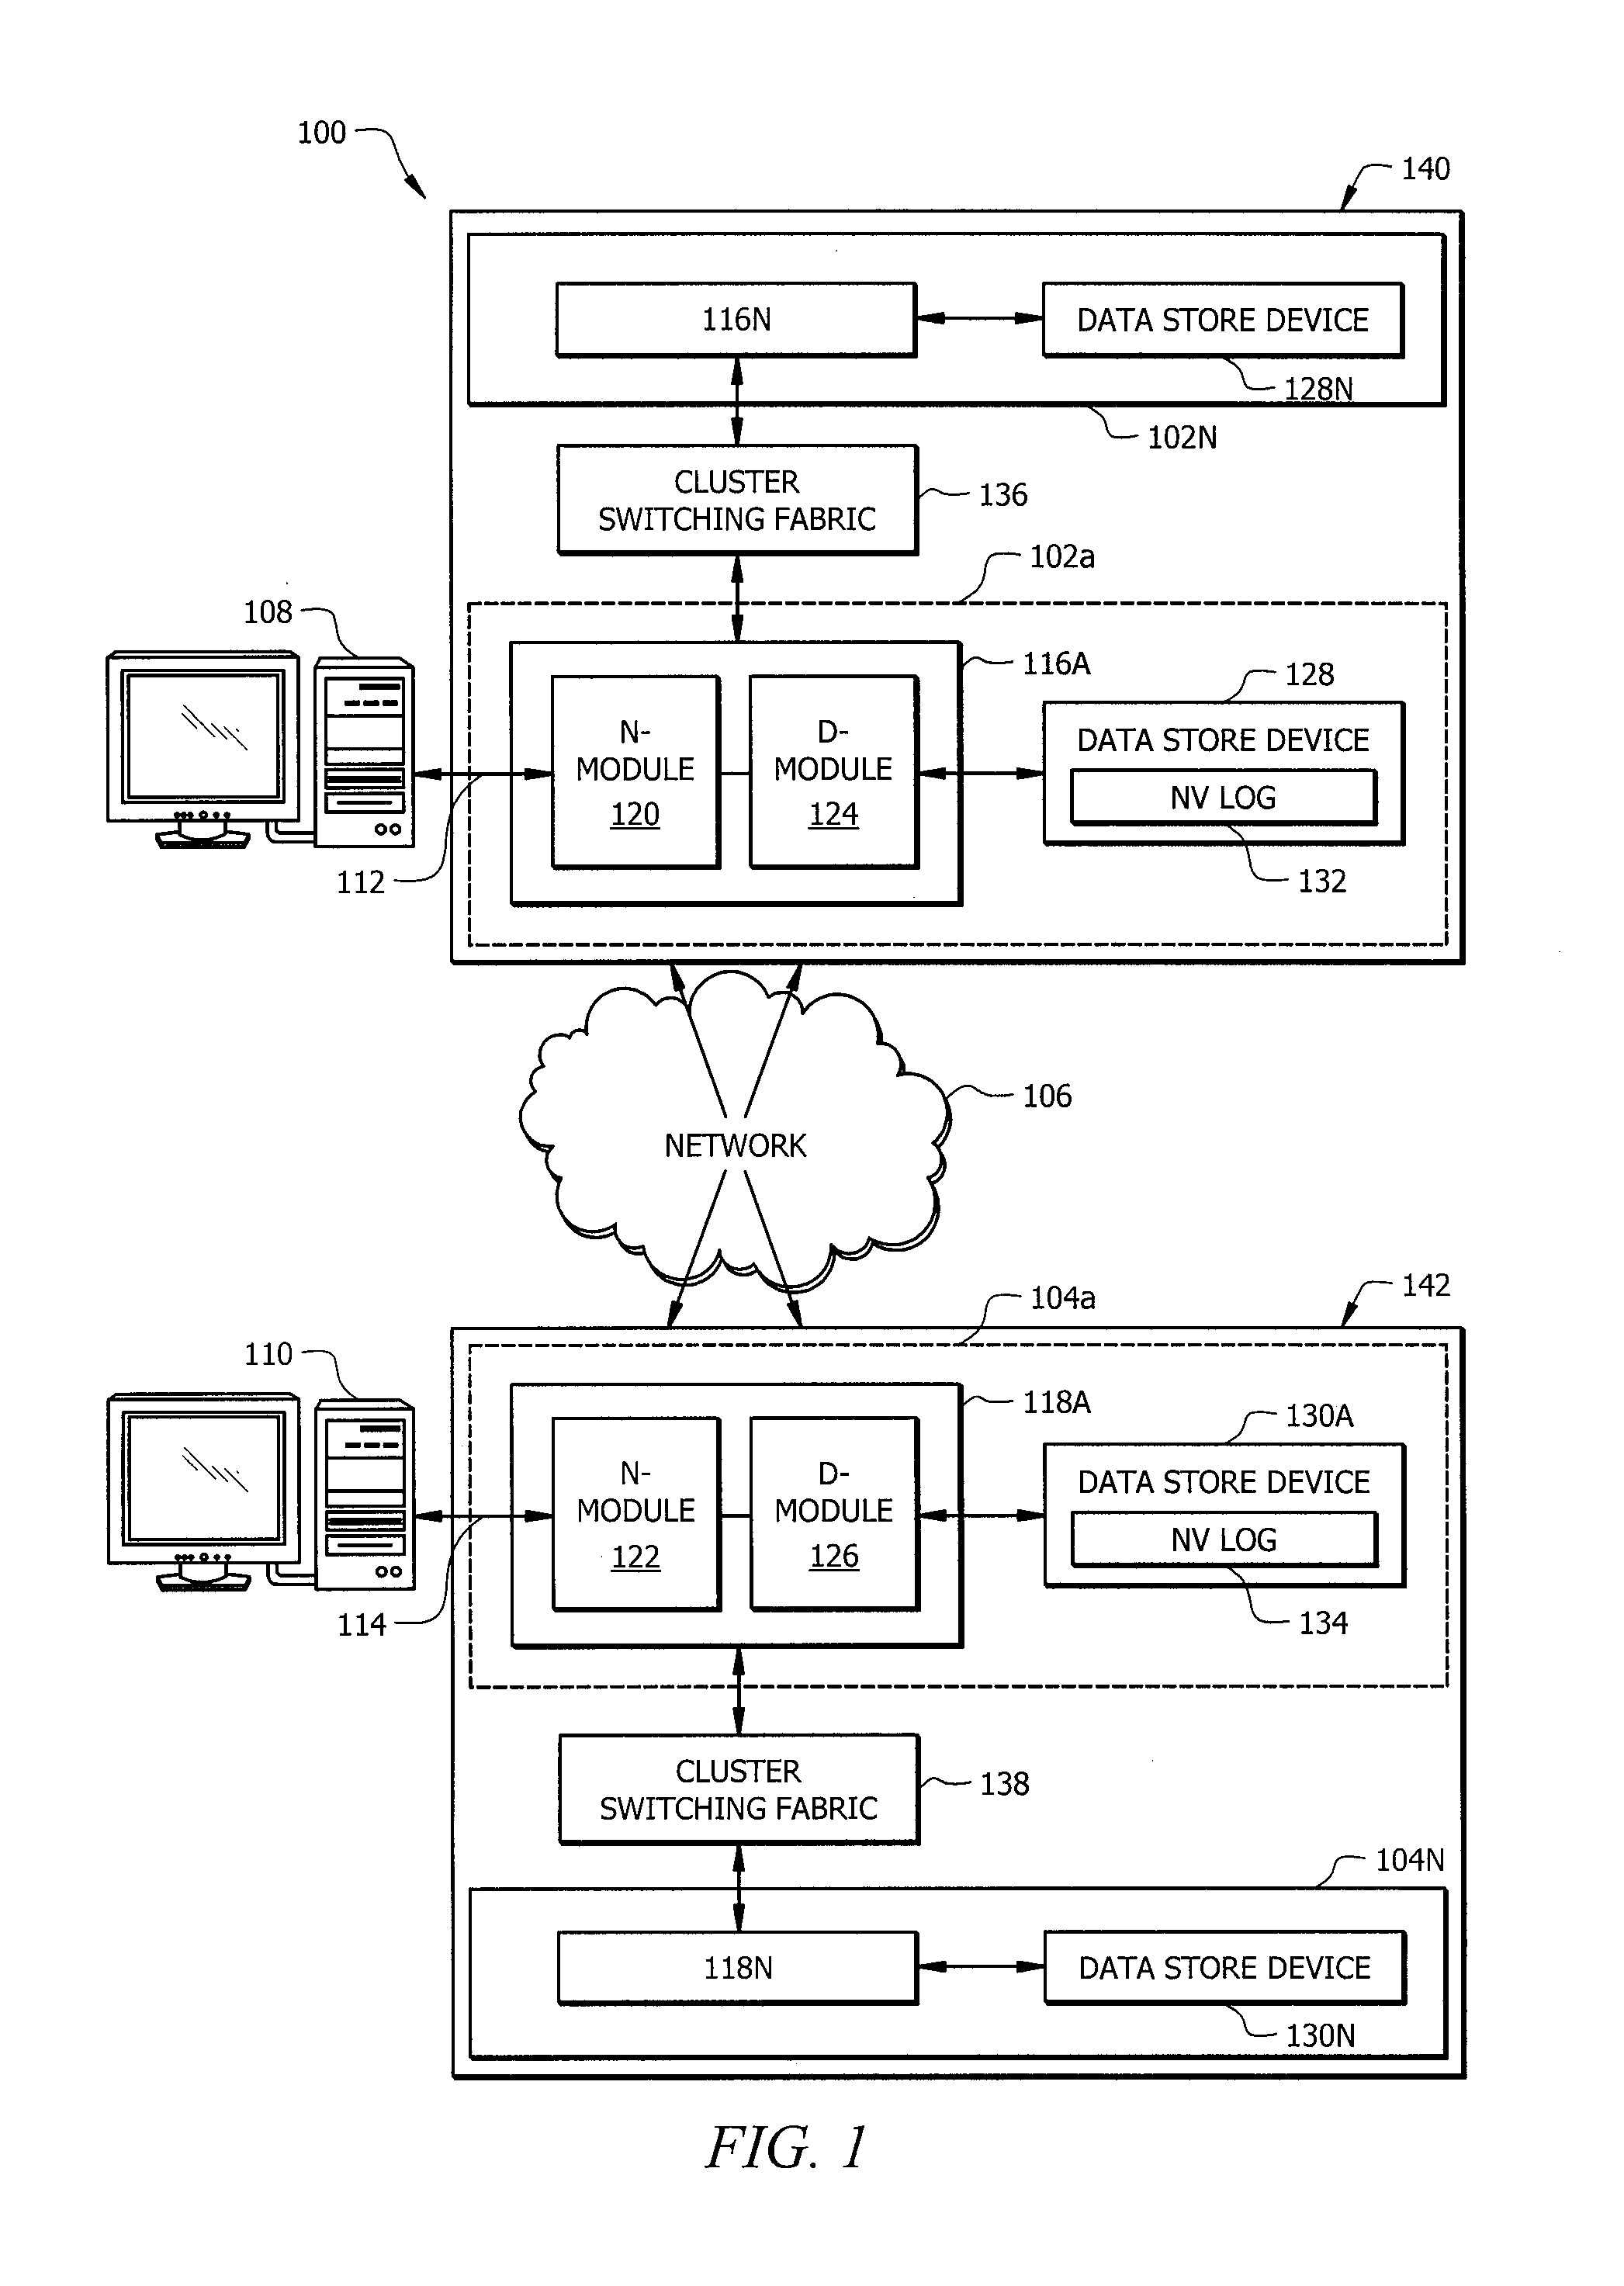 SYNCHRONOUS MIRRORING OF NVLog TO MULTIPLE DESTINATIONS (ARCHITECTURE LEVEL)